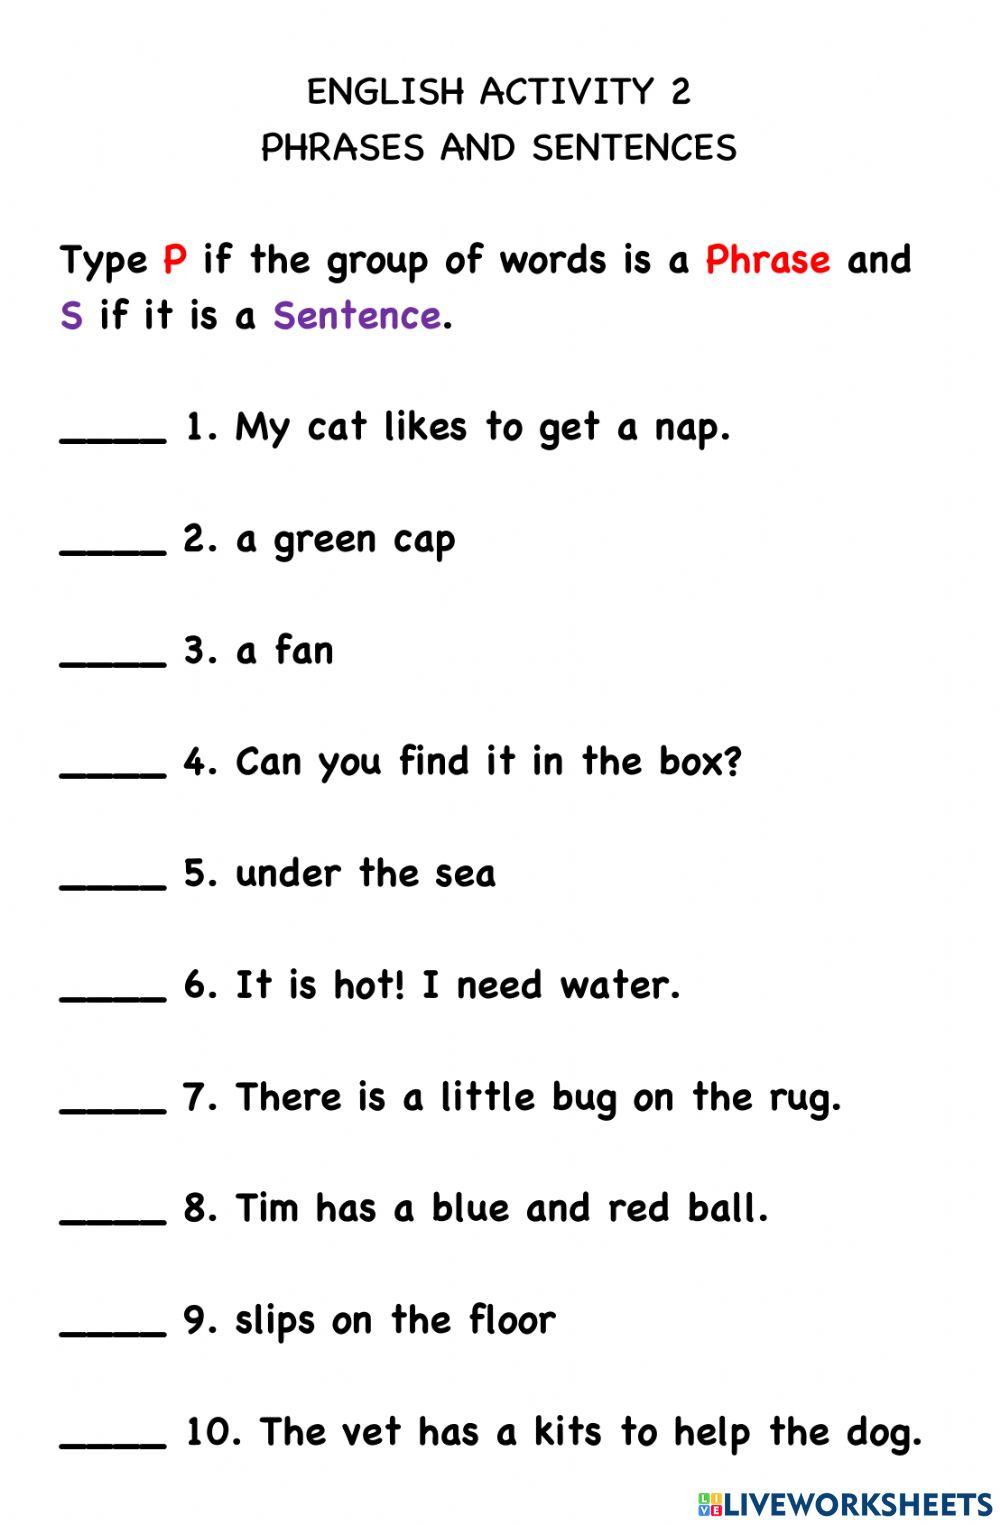 Eng W3 - Phrases and Sentences